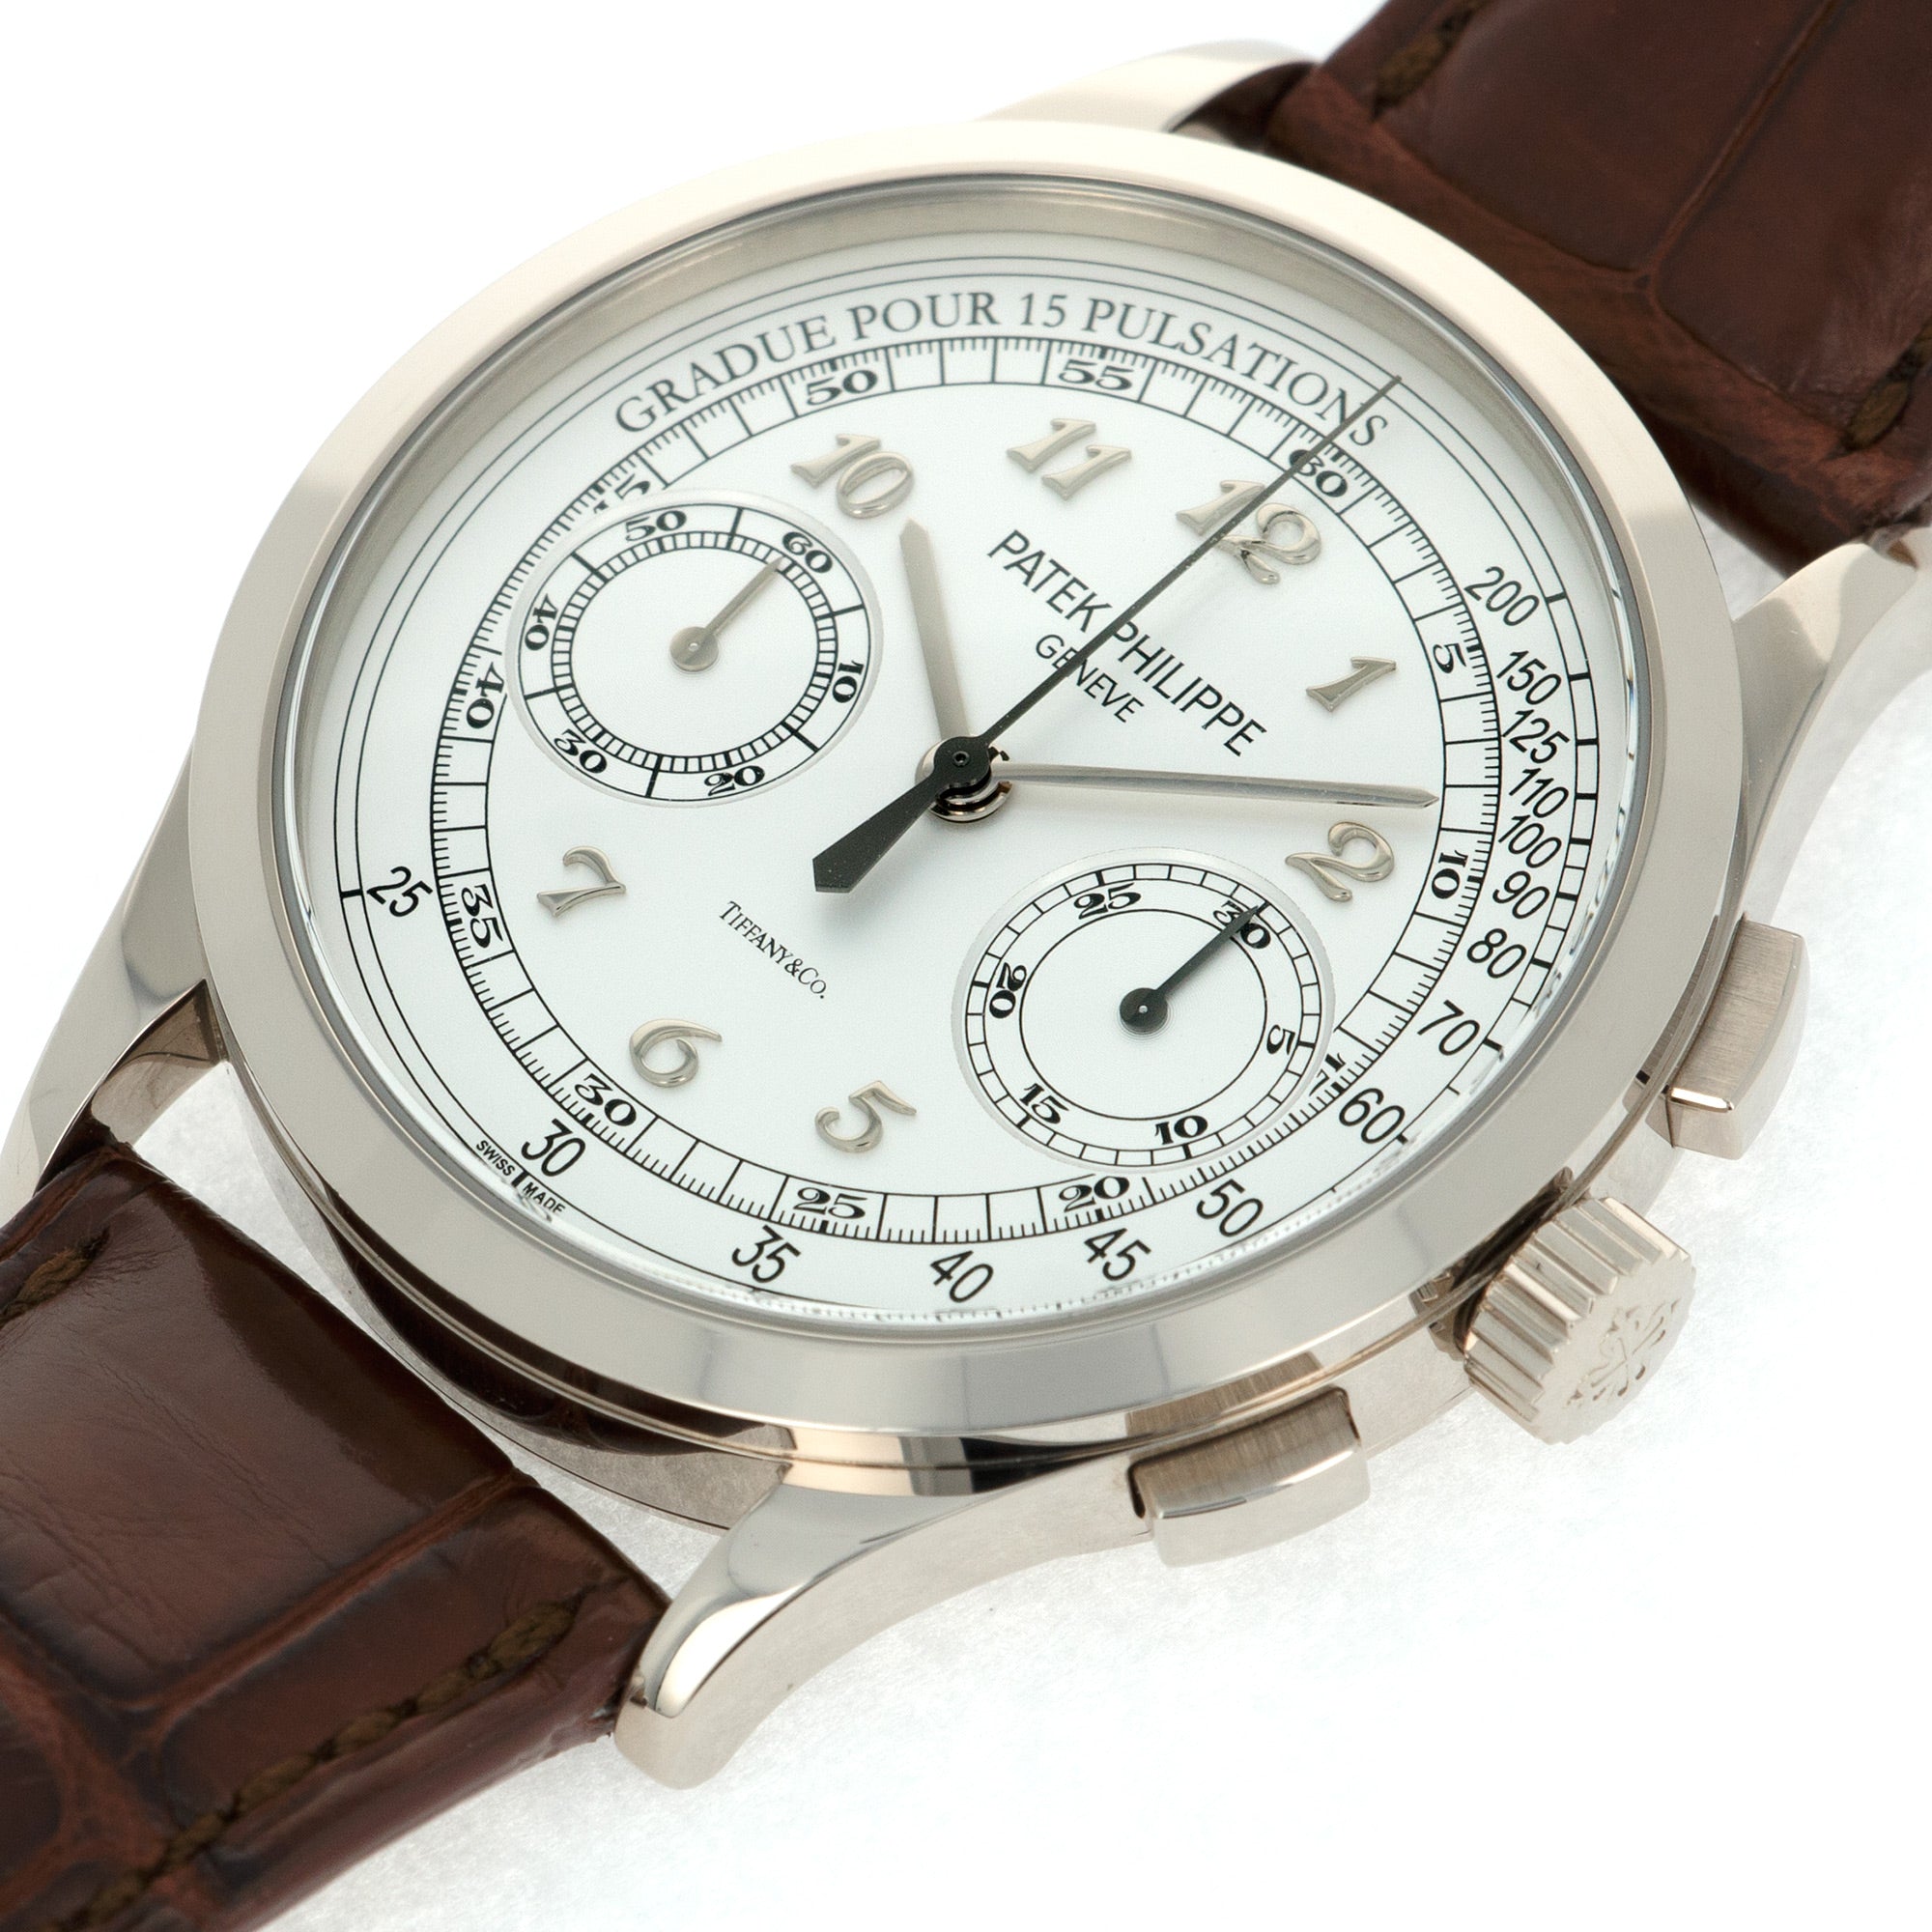 Patek Philippe - Patek Philippe White Gold Chronograph Ref. 5170, Retailed by Tiffany &amp; Co. - The Keystone Watches